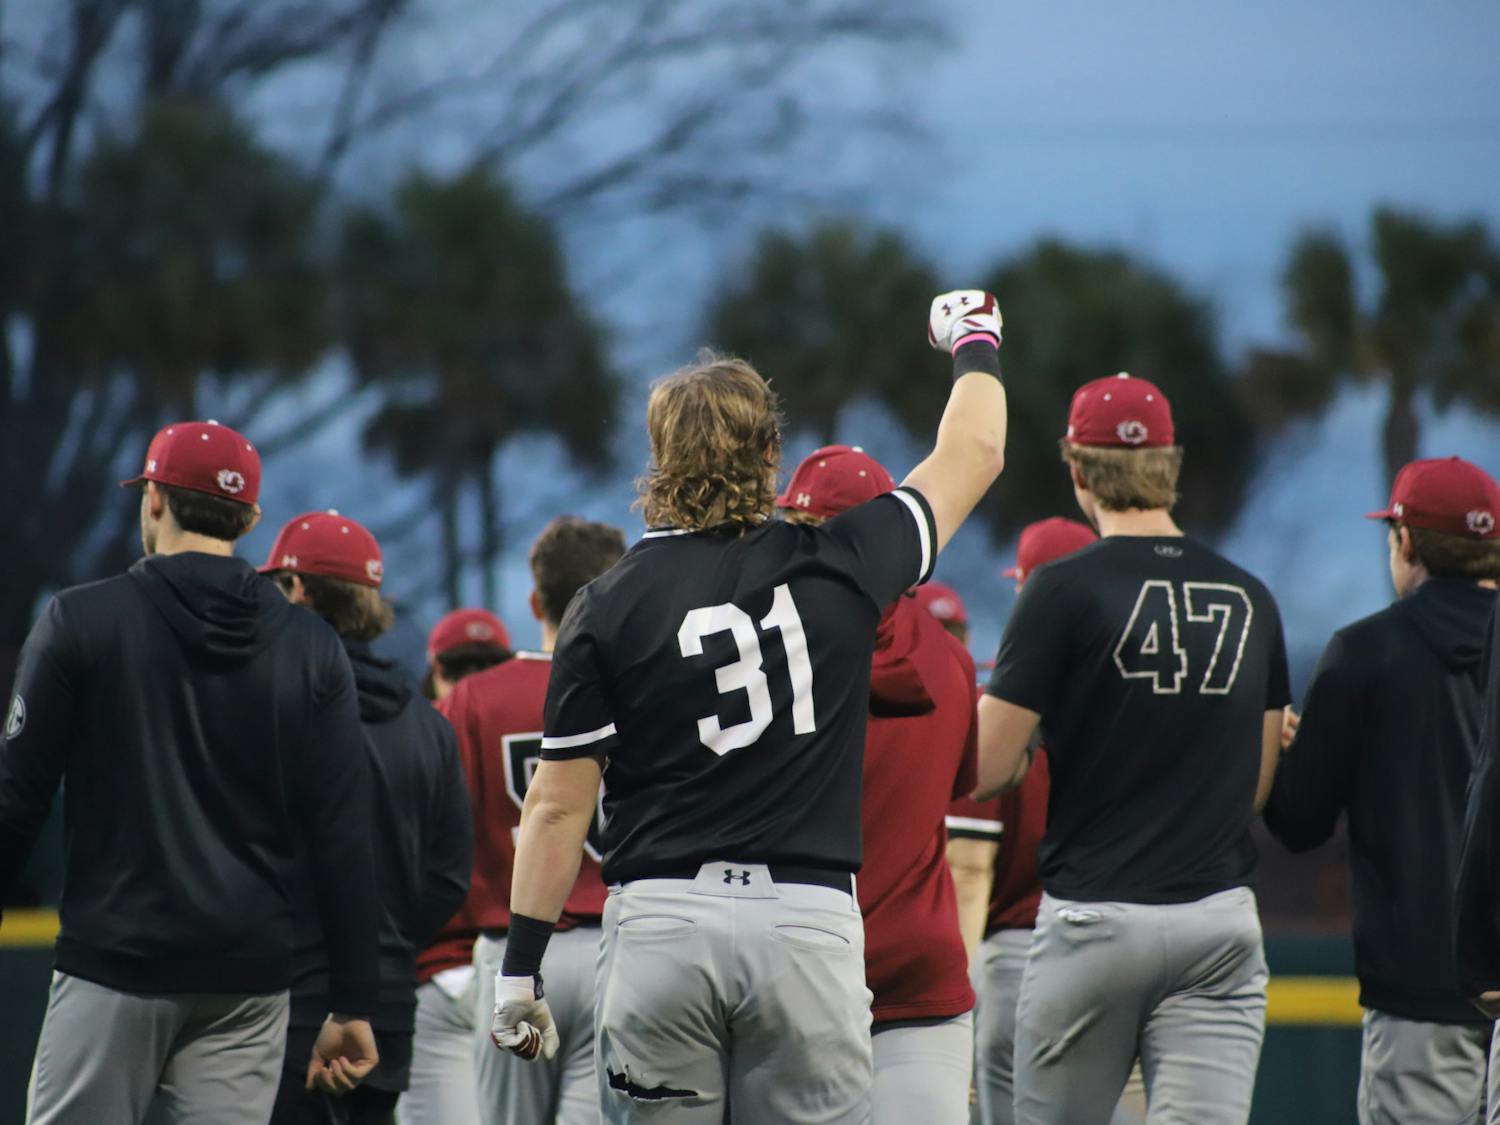 FILE—The Gamecock baseball team celebrates the end of its first February scrimmage. The Garnet and Black scrimmage was held on Feb. 1, 2023, at Founders Park, where the Garnet team beat the Black team 4-2.